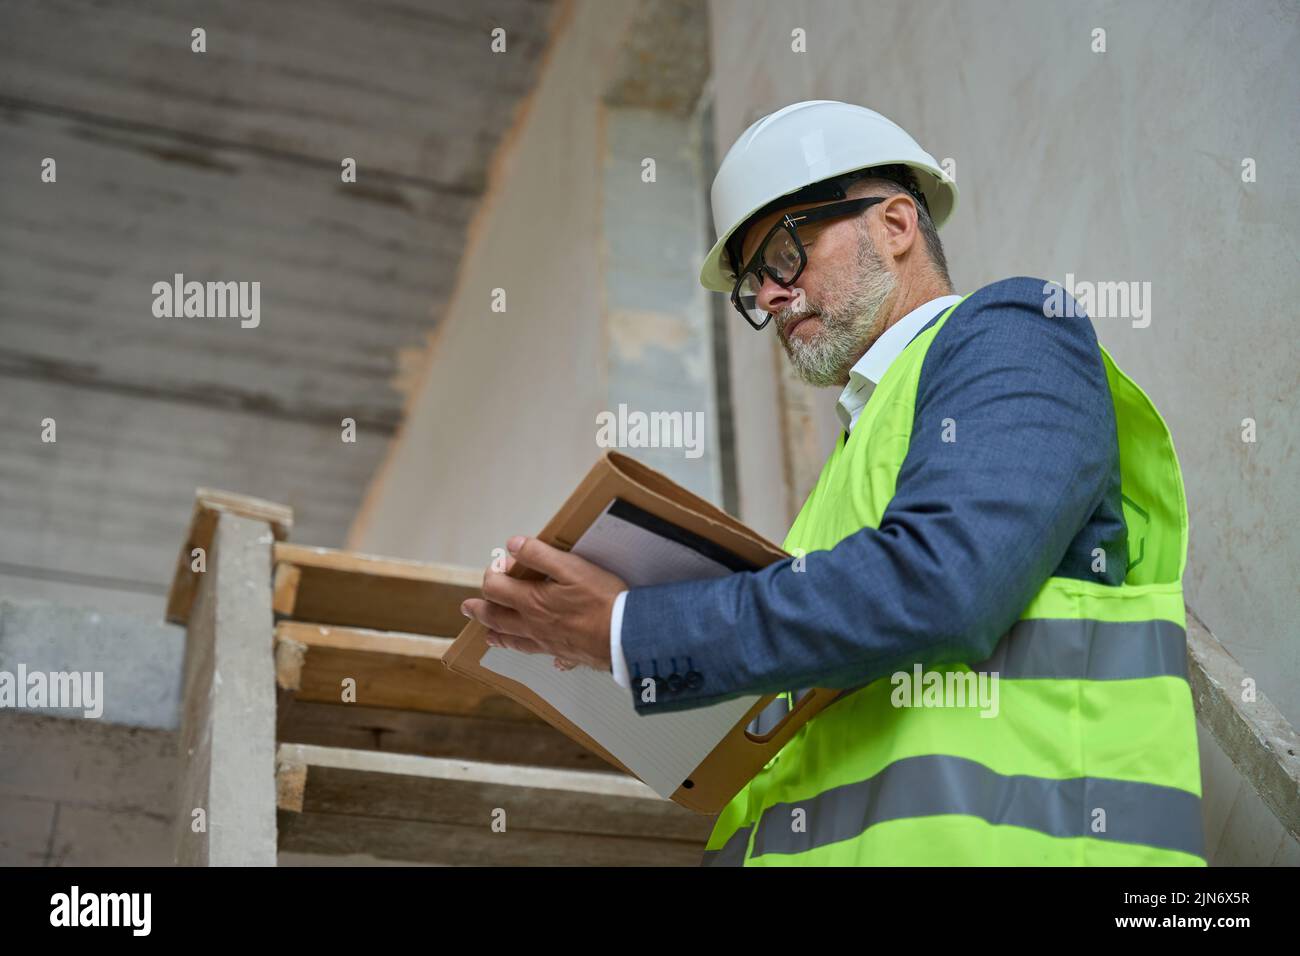 Adult male foreman makes notes in a folder Stock Photo